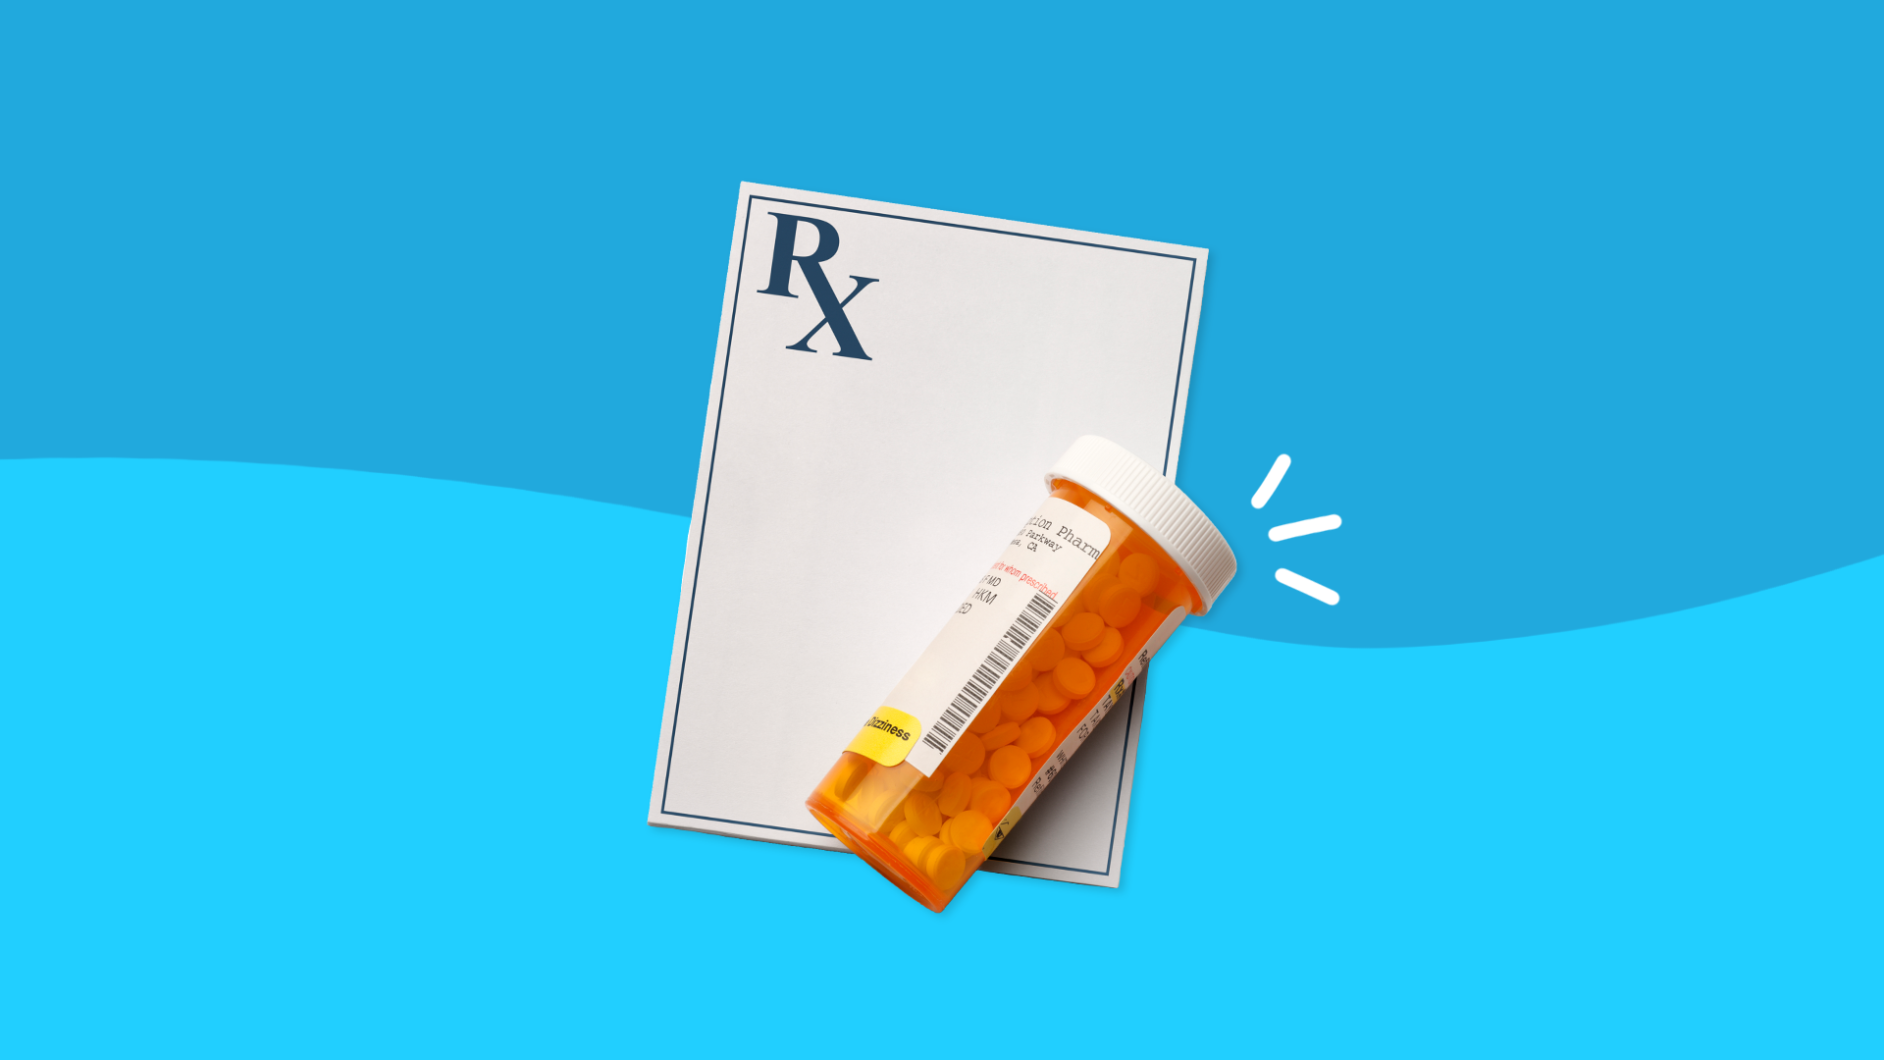 Prescription pad with pill bottle: Spironolactone side effects, warnings and interactions